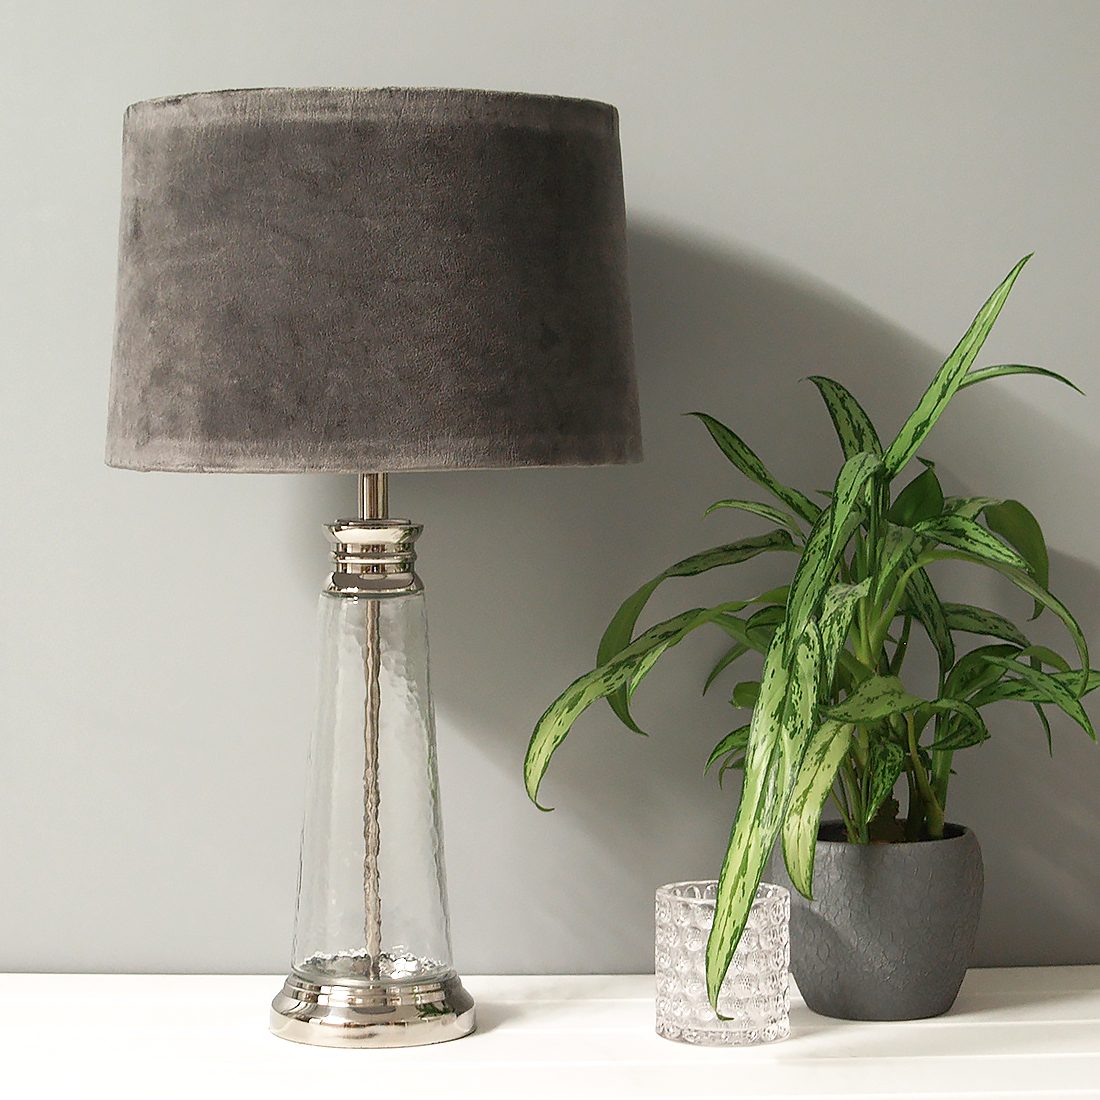 Textured Glass Table Lamp With Grey, Grey Textured Lamp Shade